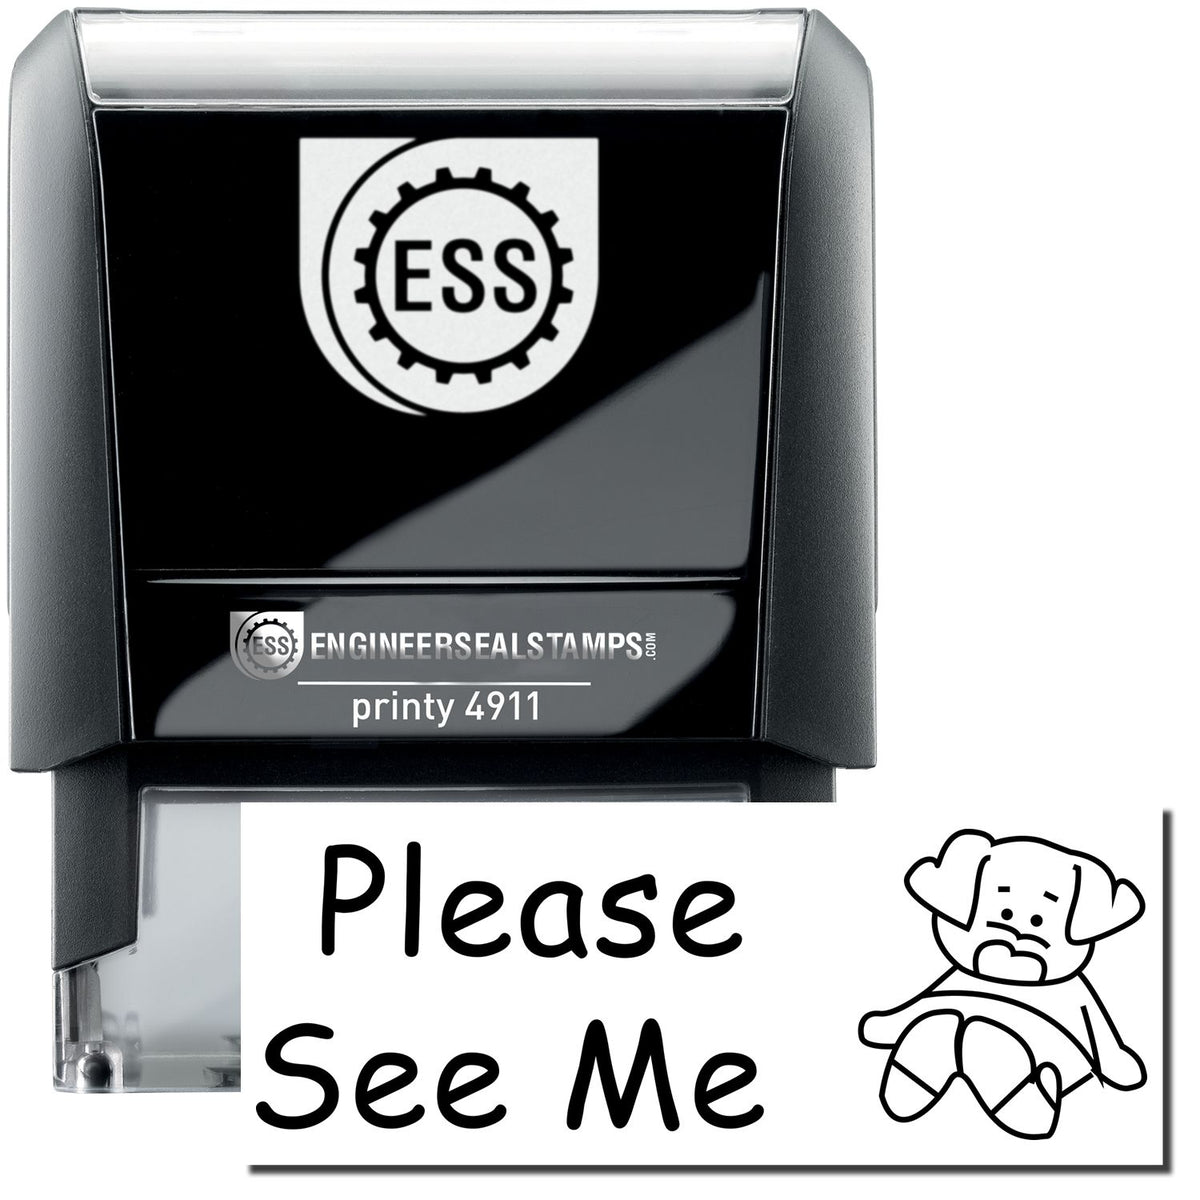 A self-inking stamp with a stamped image showing how the text &quot;Please See Me&quot; with a small image of a dog on the right side is displayed after stamping.